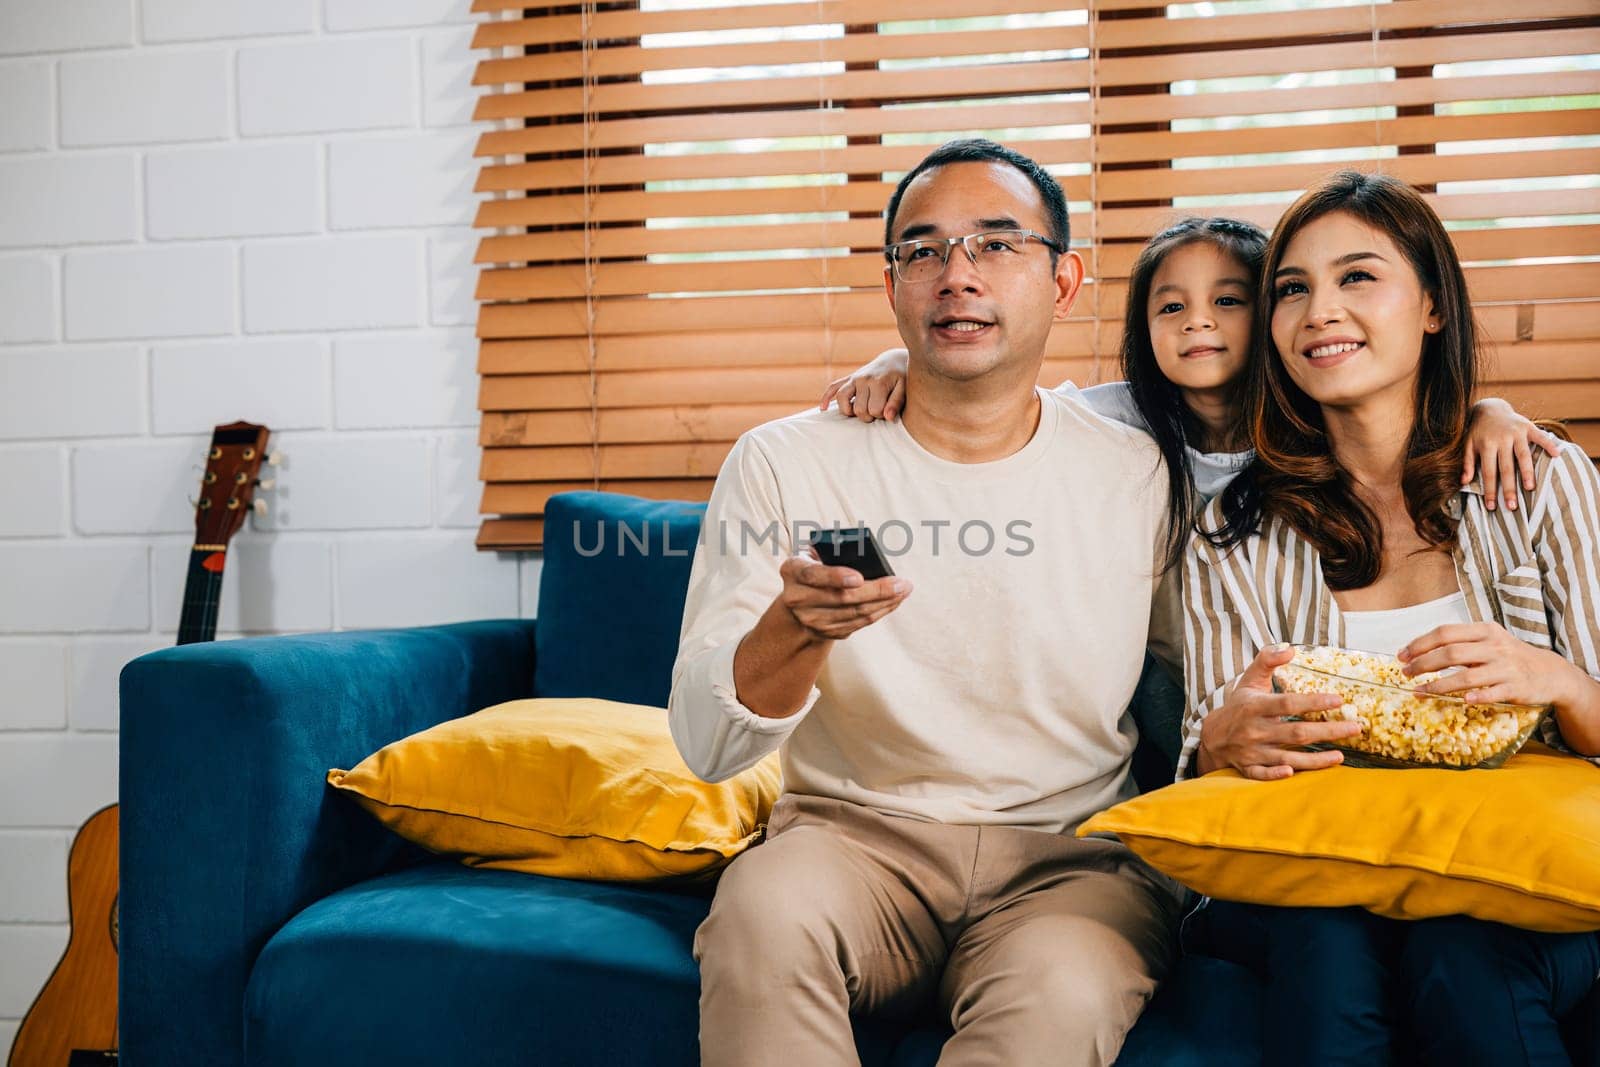 A joyful family spends quality time at home watching TV with popcorn on sofa. father mother son daughter and schoolgirl create precious family moments filled with candid enjoyment and happiness.